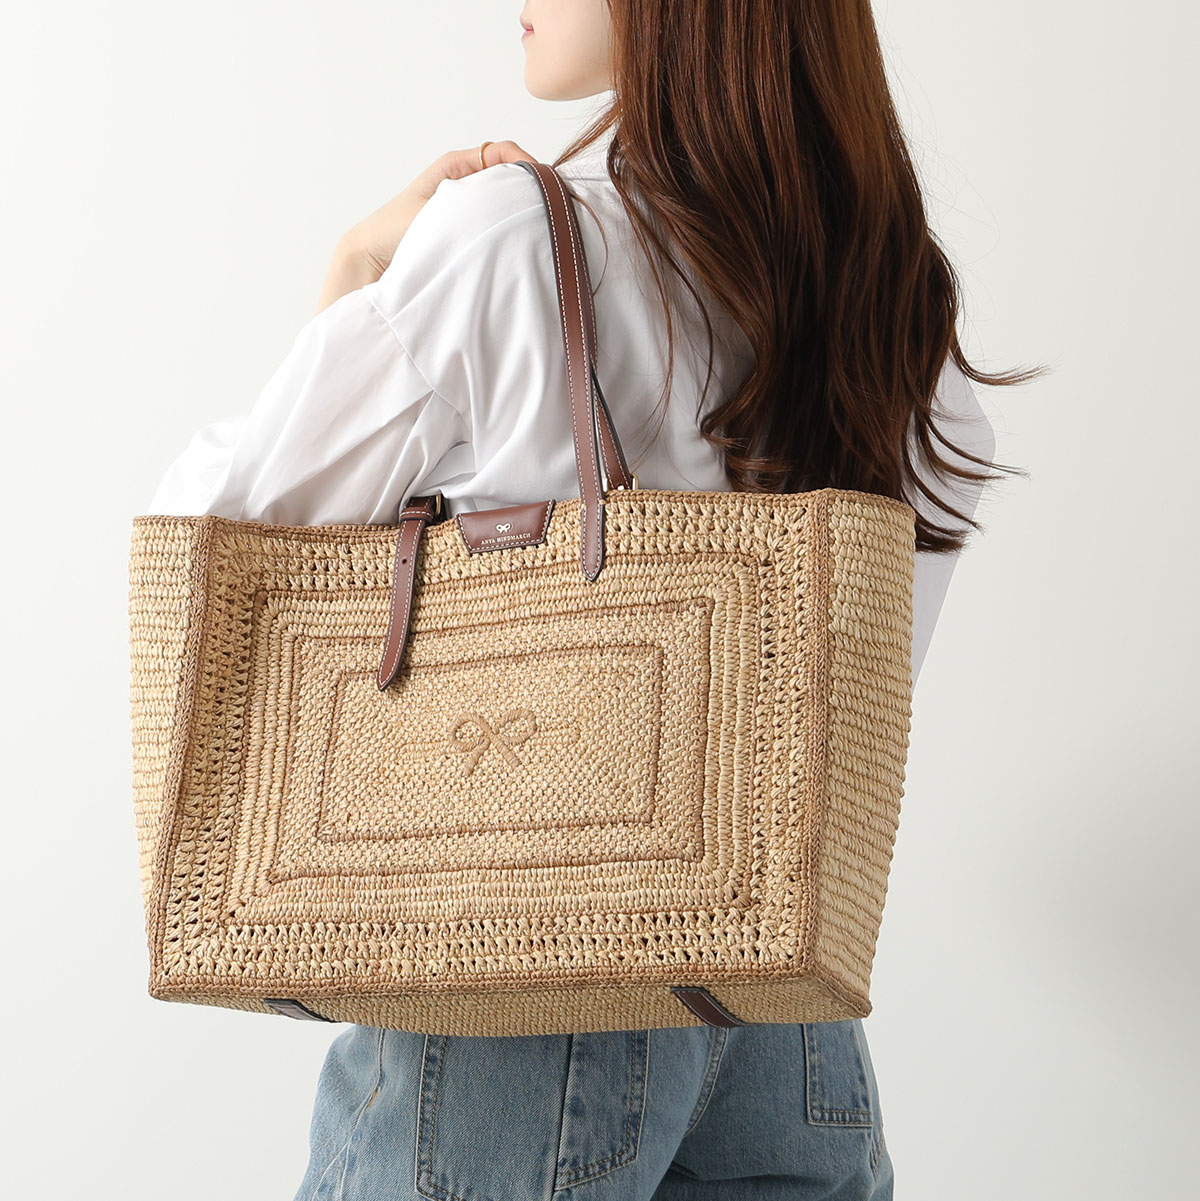 ANYA HINDMARCH アニヤハインドマーチ かごバッグ E/W Bow Tote in Na...